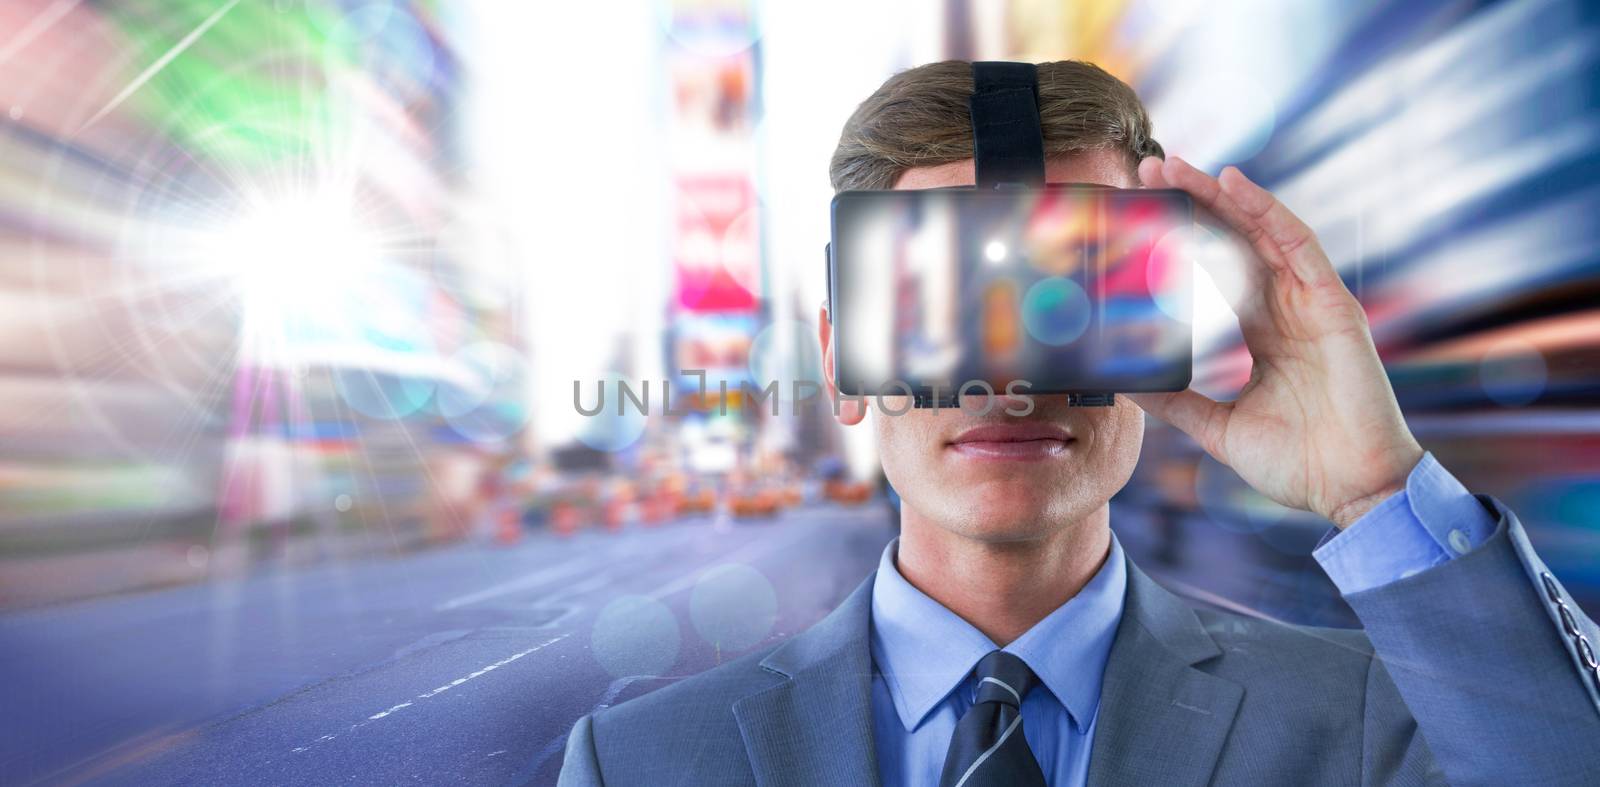 Composite image of businessman in suit using virtual reality headset by Wavebreakmedia